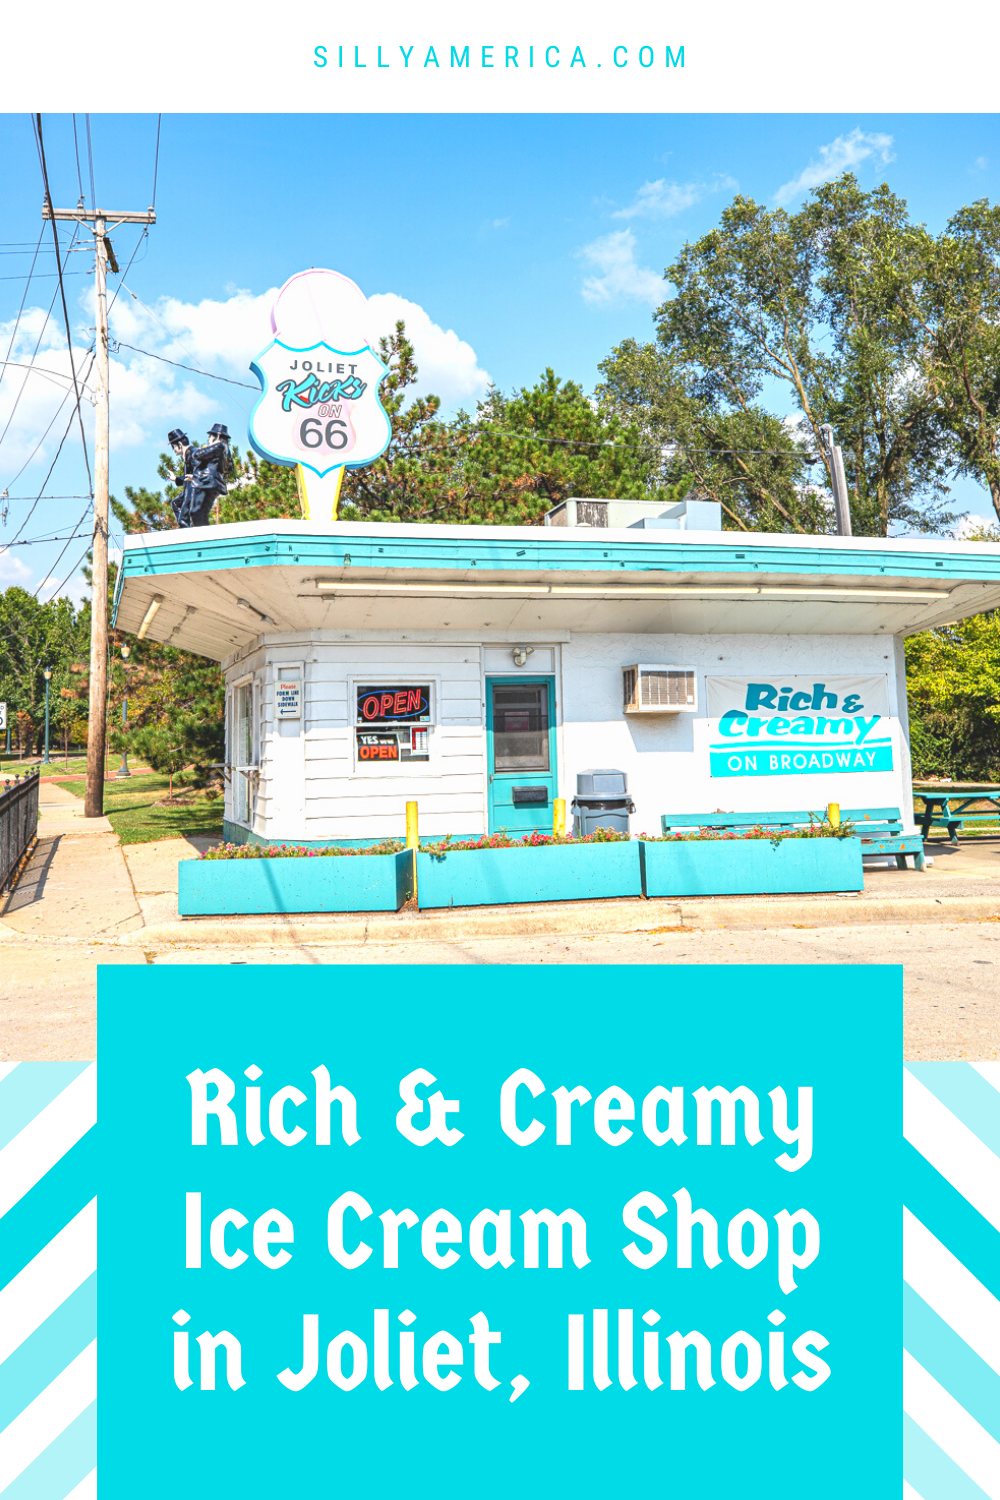 Rich & Creamy in Joliet, Illinois is a small ice cream shop with big ties to Route 66. Stop for a scoop of ice cream, milkshake, or sundae and then explore the Joliet Route 66 park. See Blues Brothers statues on the roof. Add this to your travel itinerary.  #RoadTrips #RoadTripStop #Route66 #Route66RoadTrip #IllinoisRoute66 #Illinois #IllinoisRoadTrip #IllinoisRoadsideAttractions #RoadsideAttractions #RoadsideAttraction #RoadsideAmerica #RoadTrip #IceCream